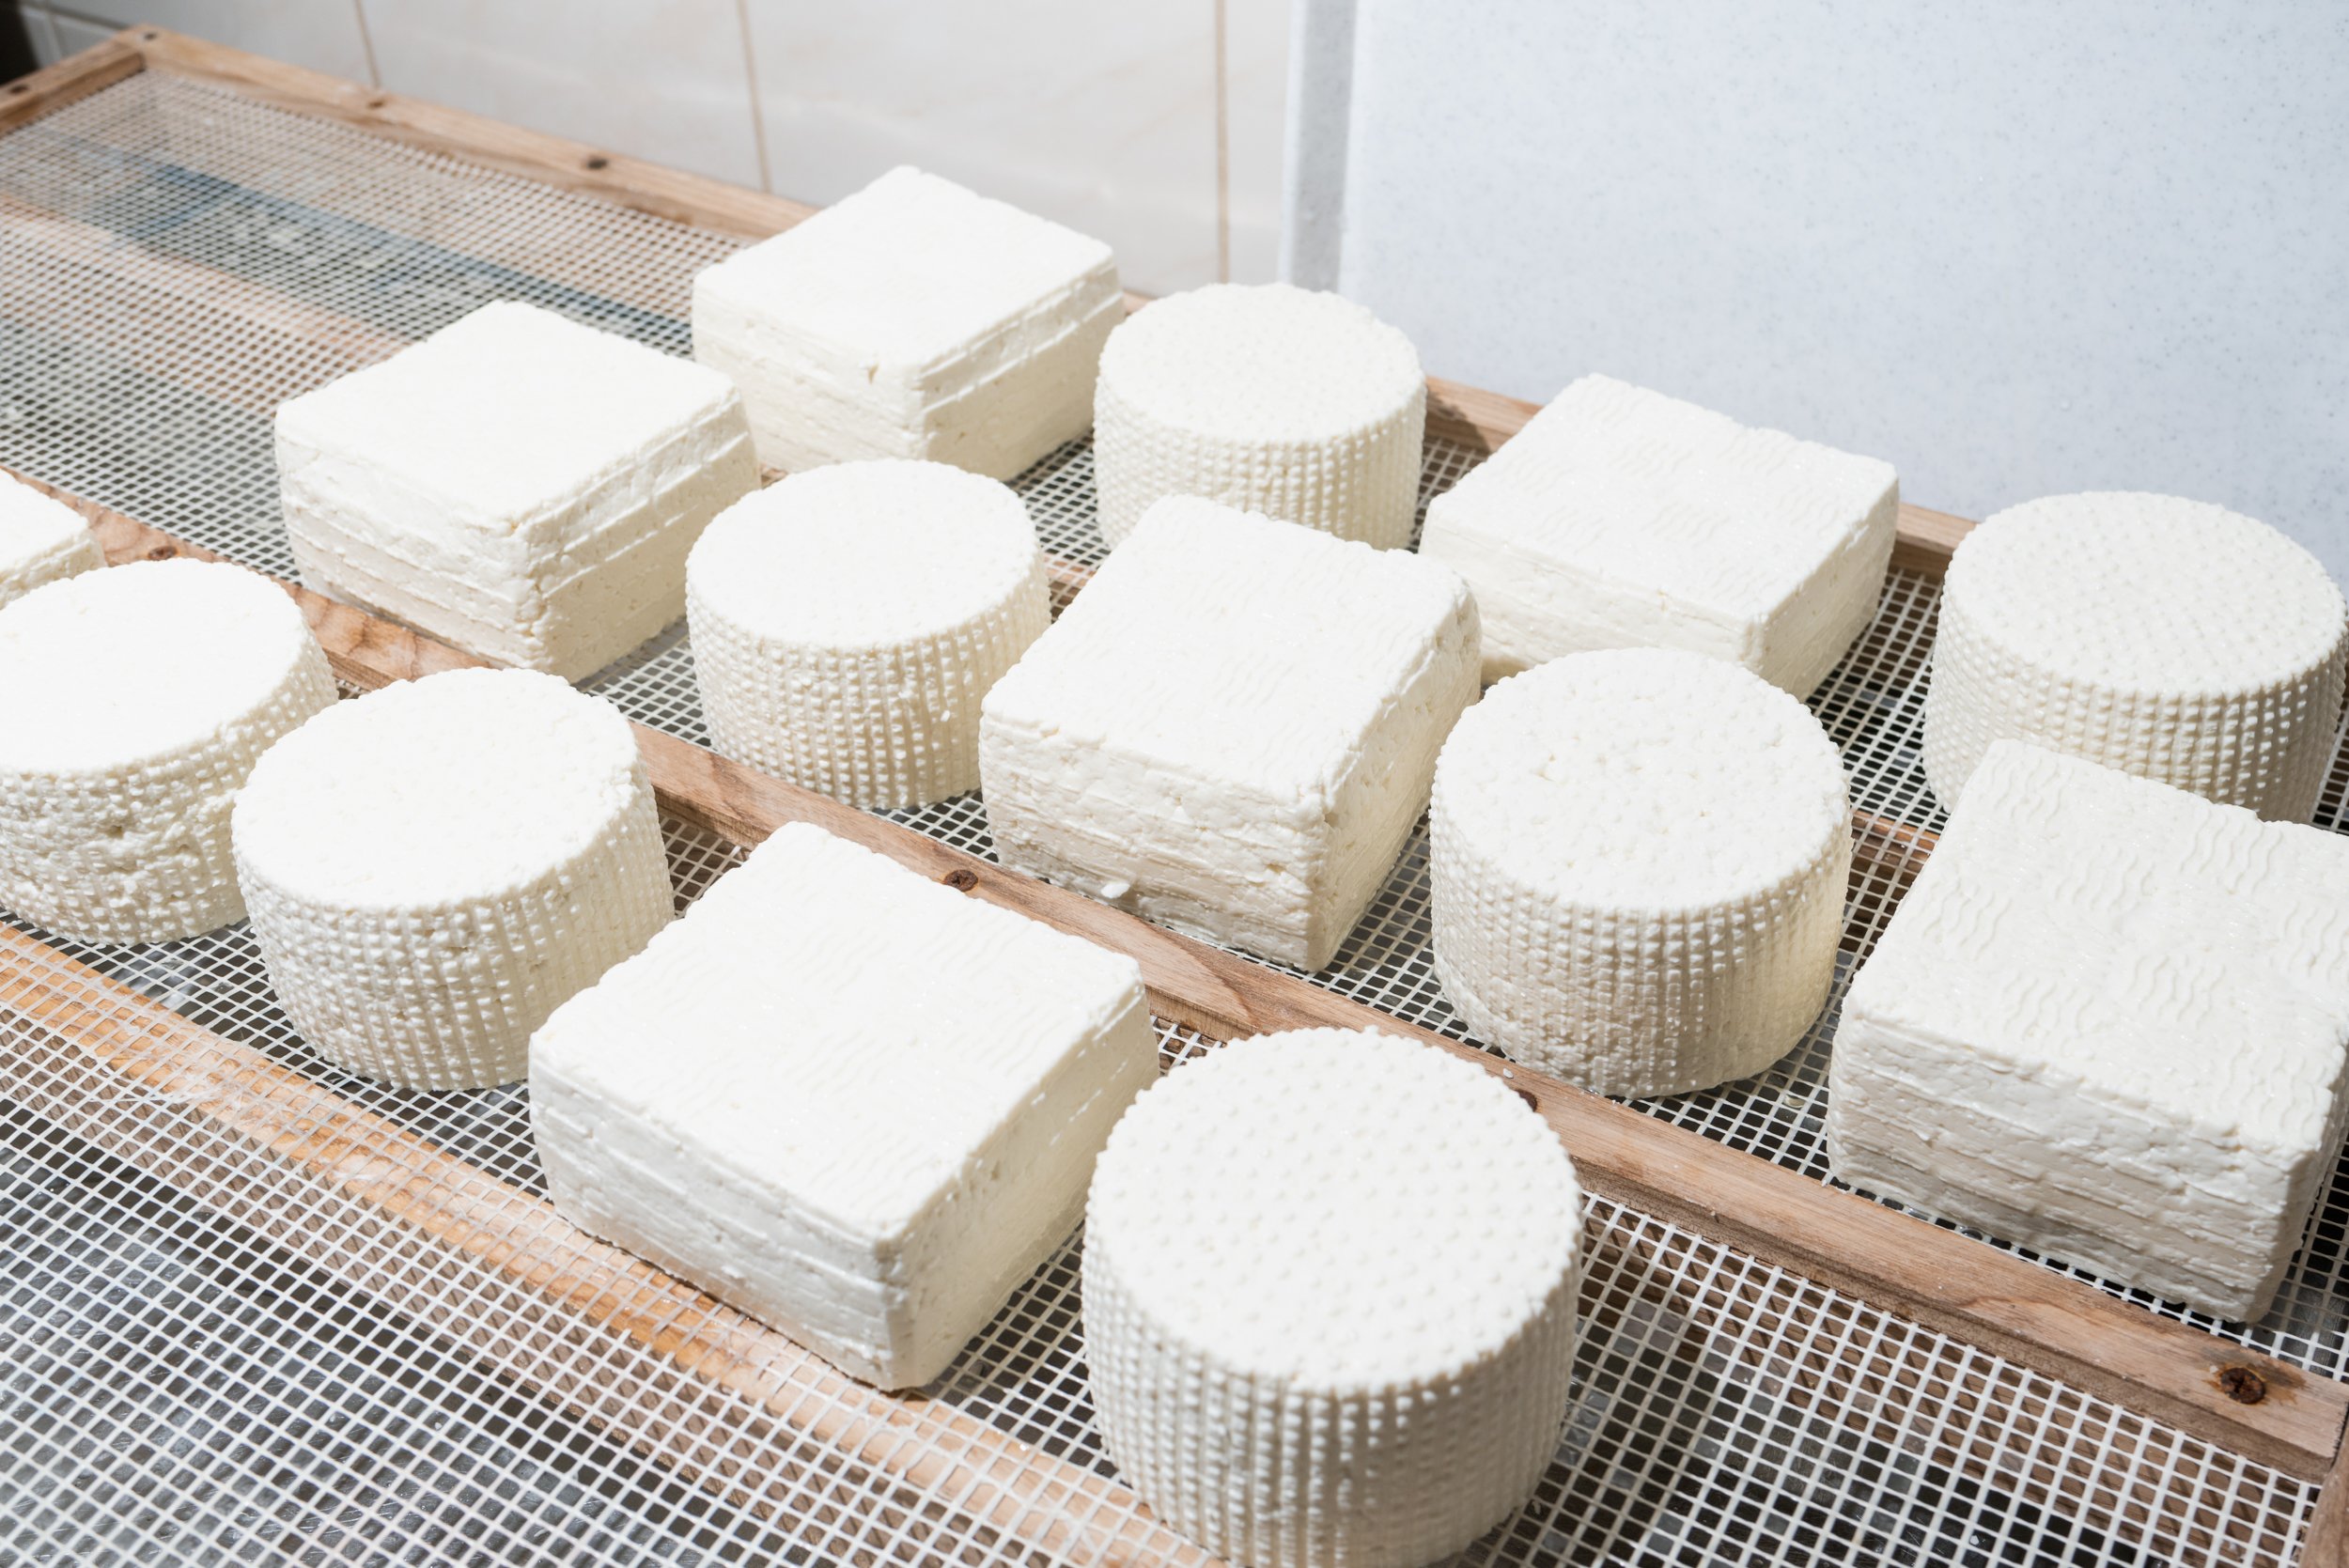 Orava sheep's cheese curing